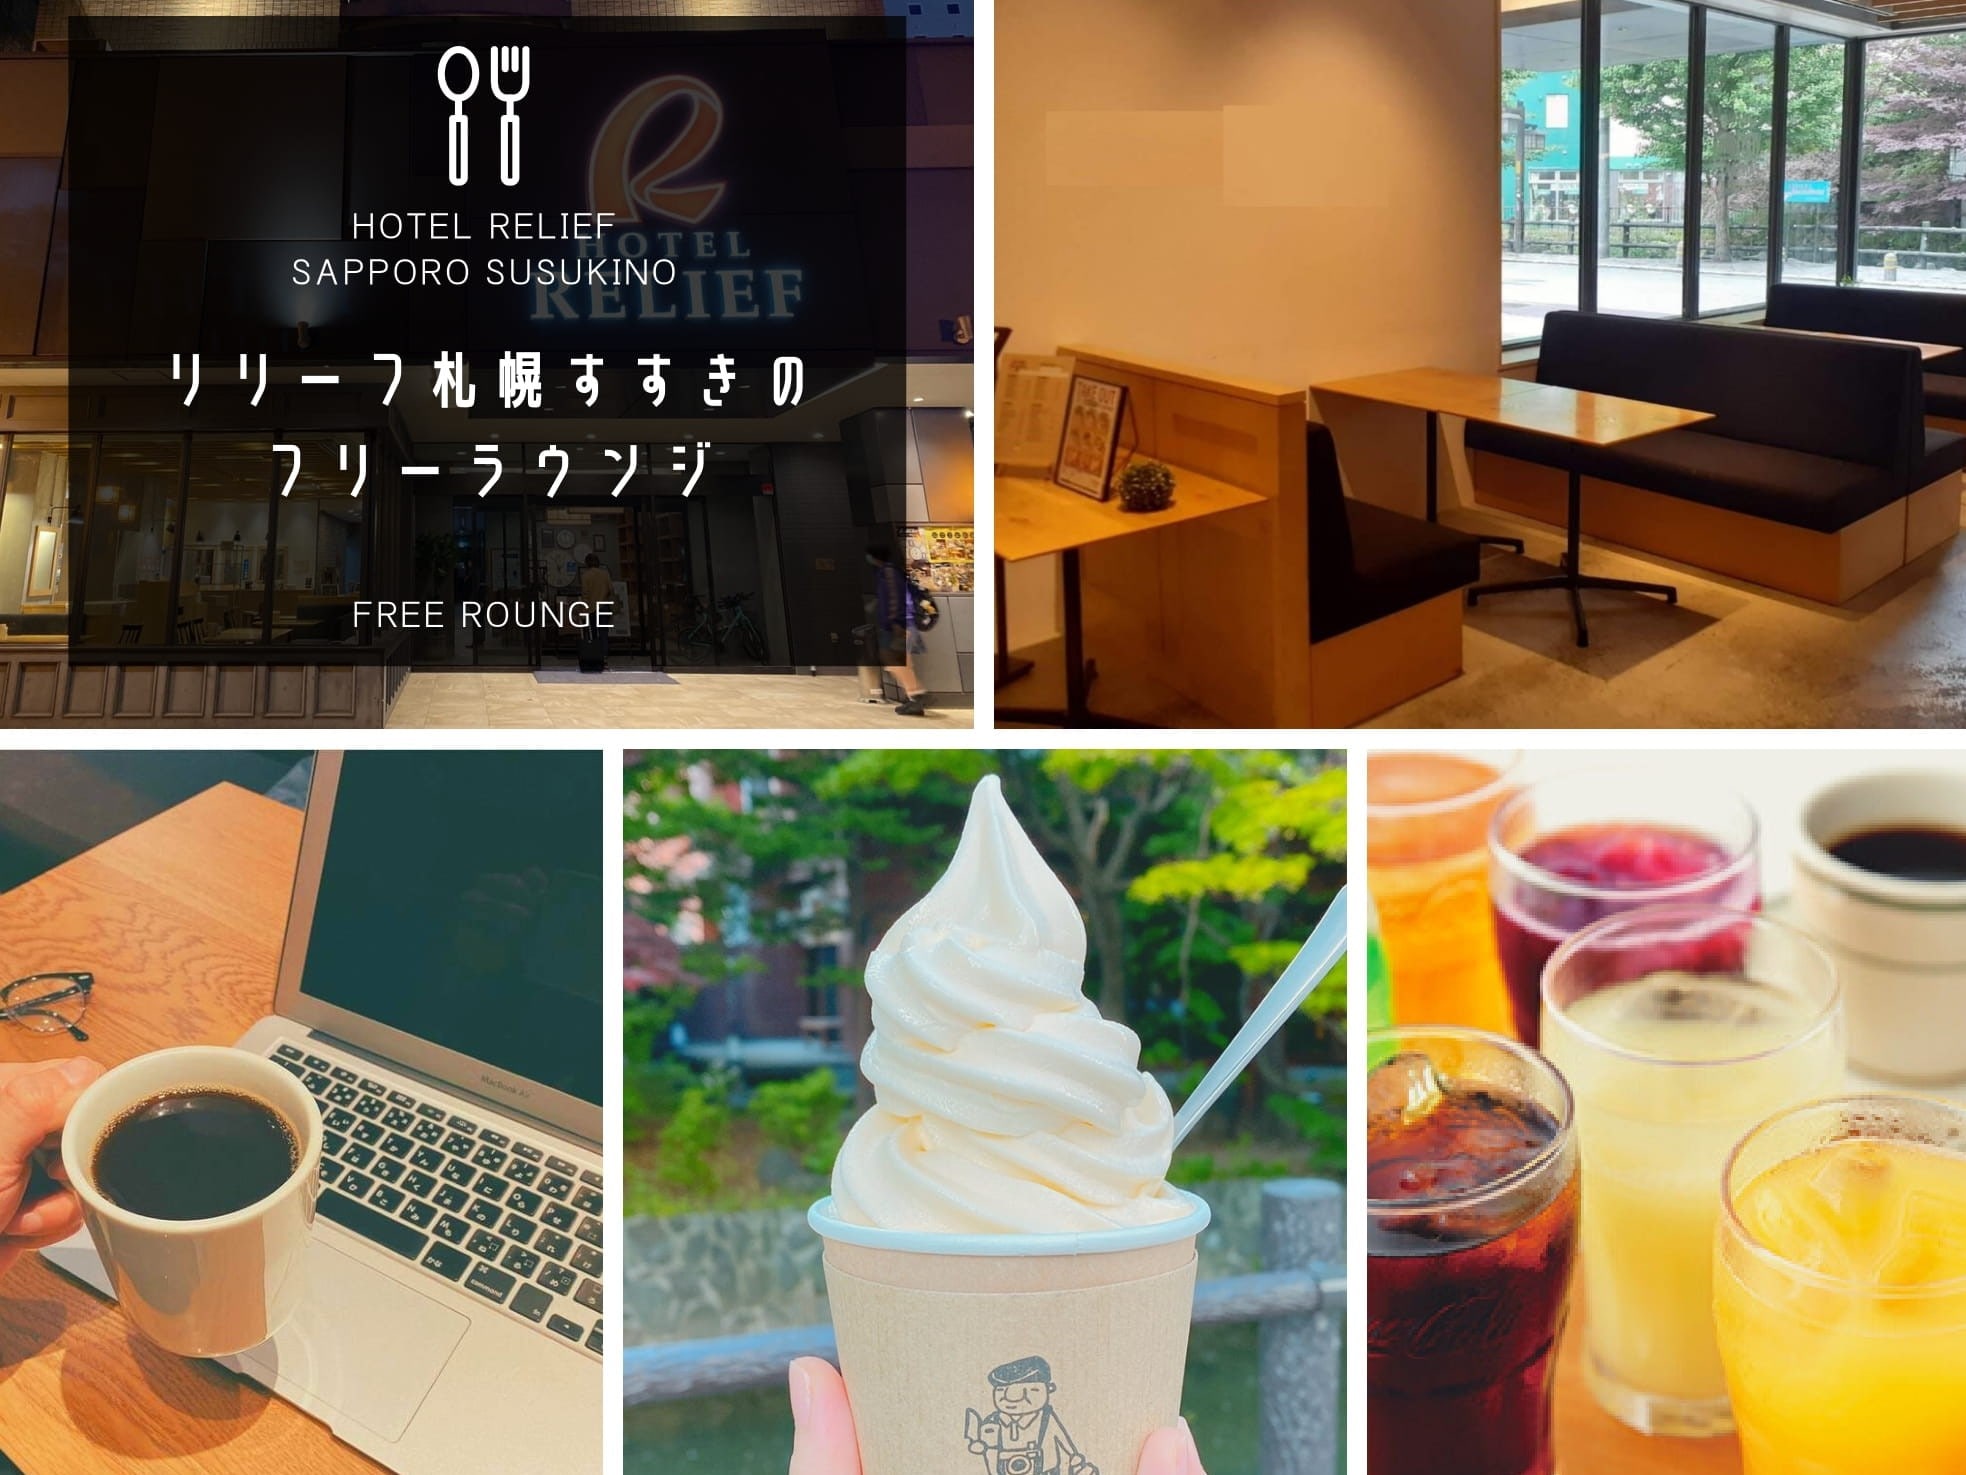 [Free lounge] Drink bar and soft serve ice cream are available ♪ (Business hours: 12:00 to 21:00)